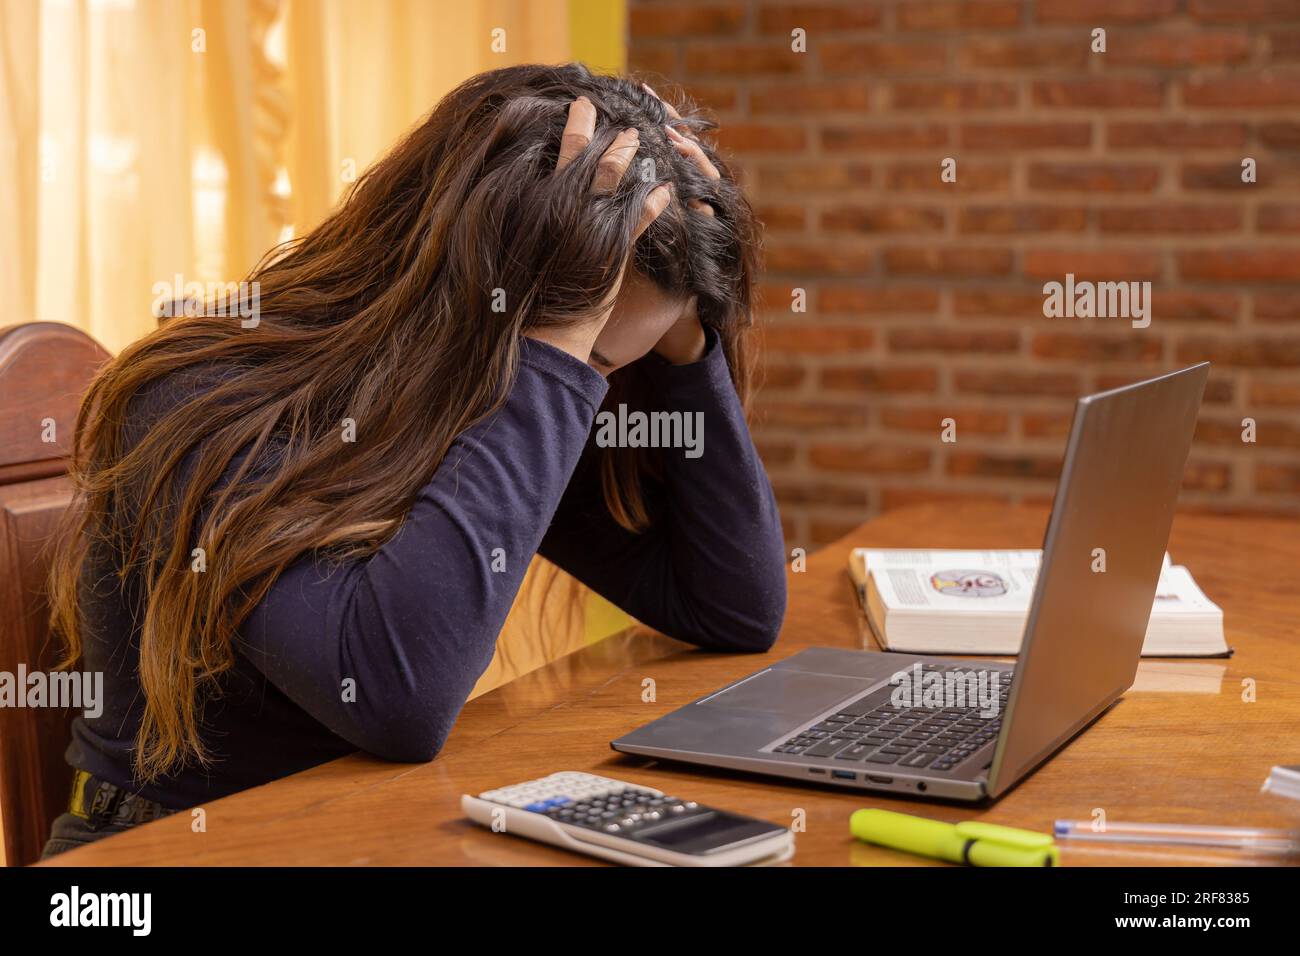 Stressed latin girl, studying in front of a laptop. Stock Photo